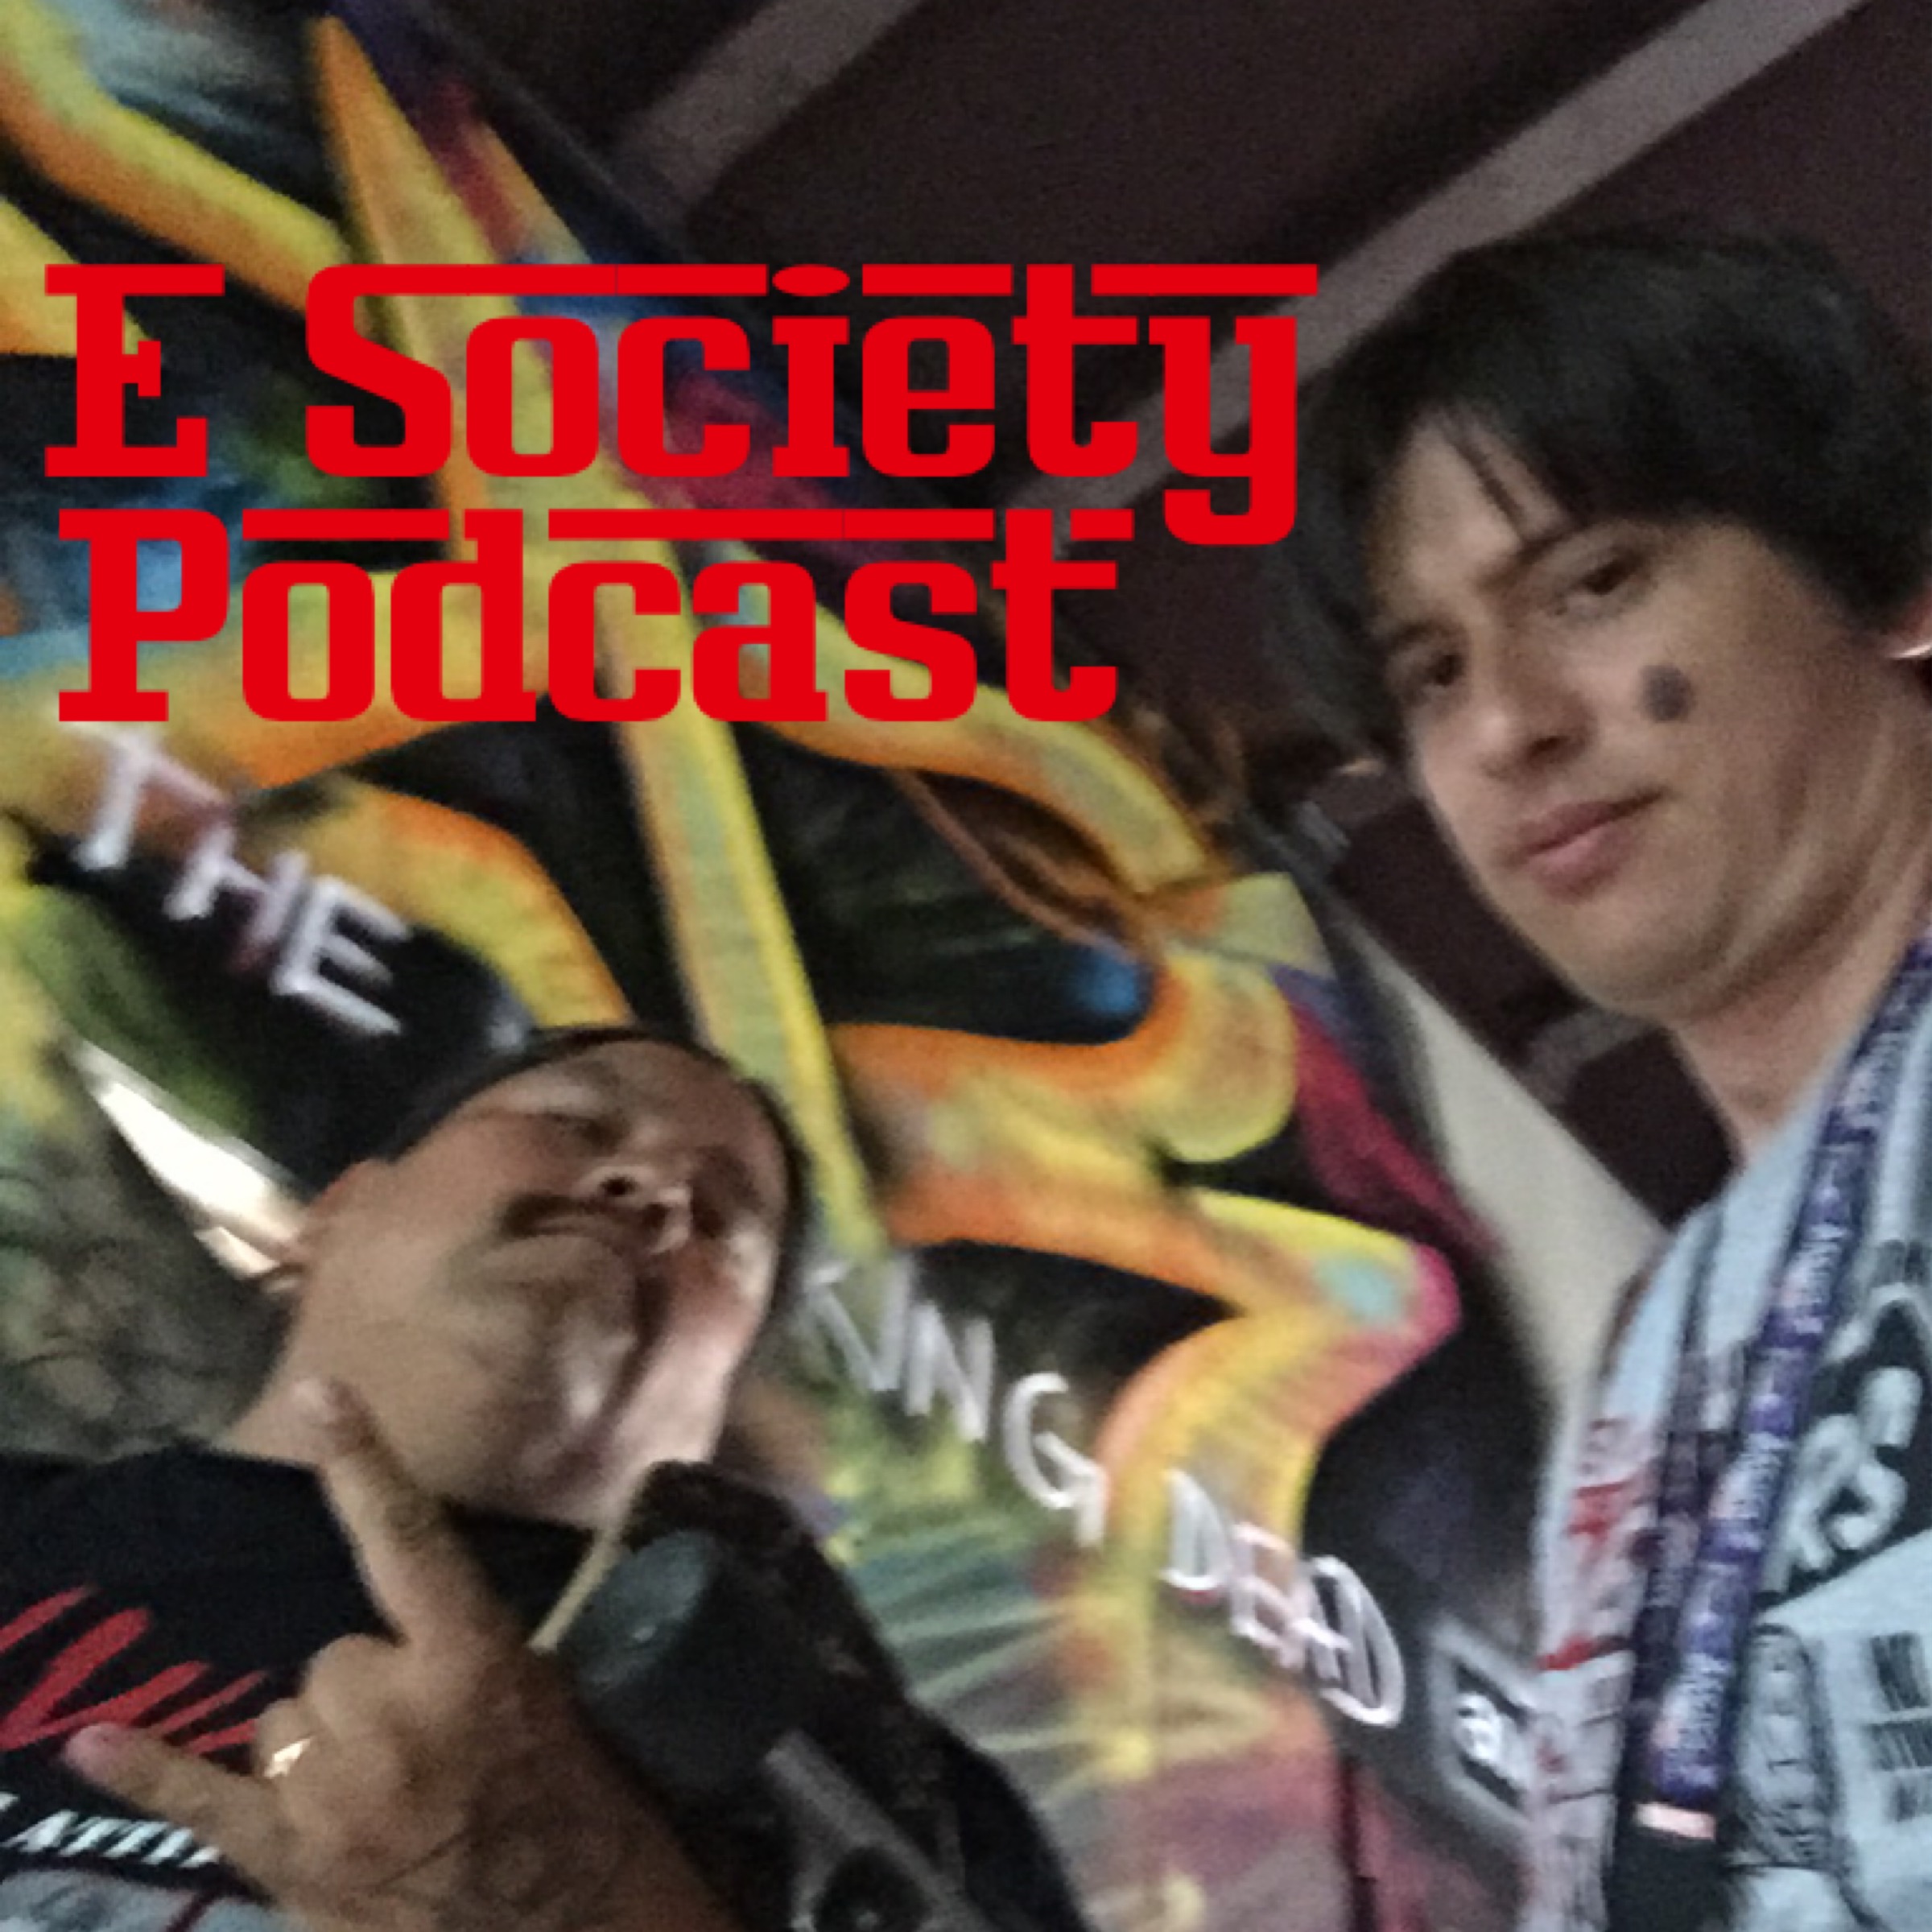 E Society Podcast - Ep. 71: Back with the quickness